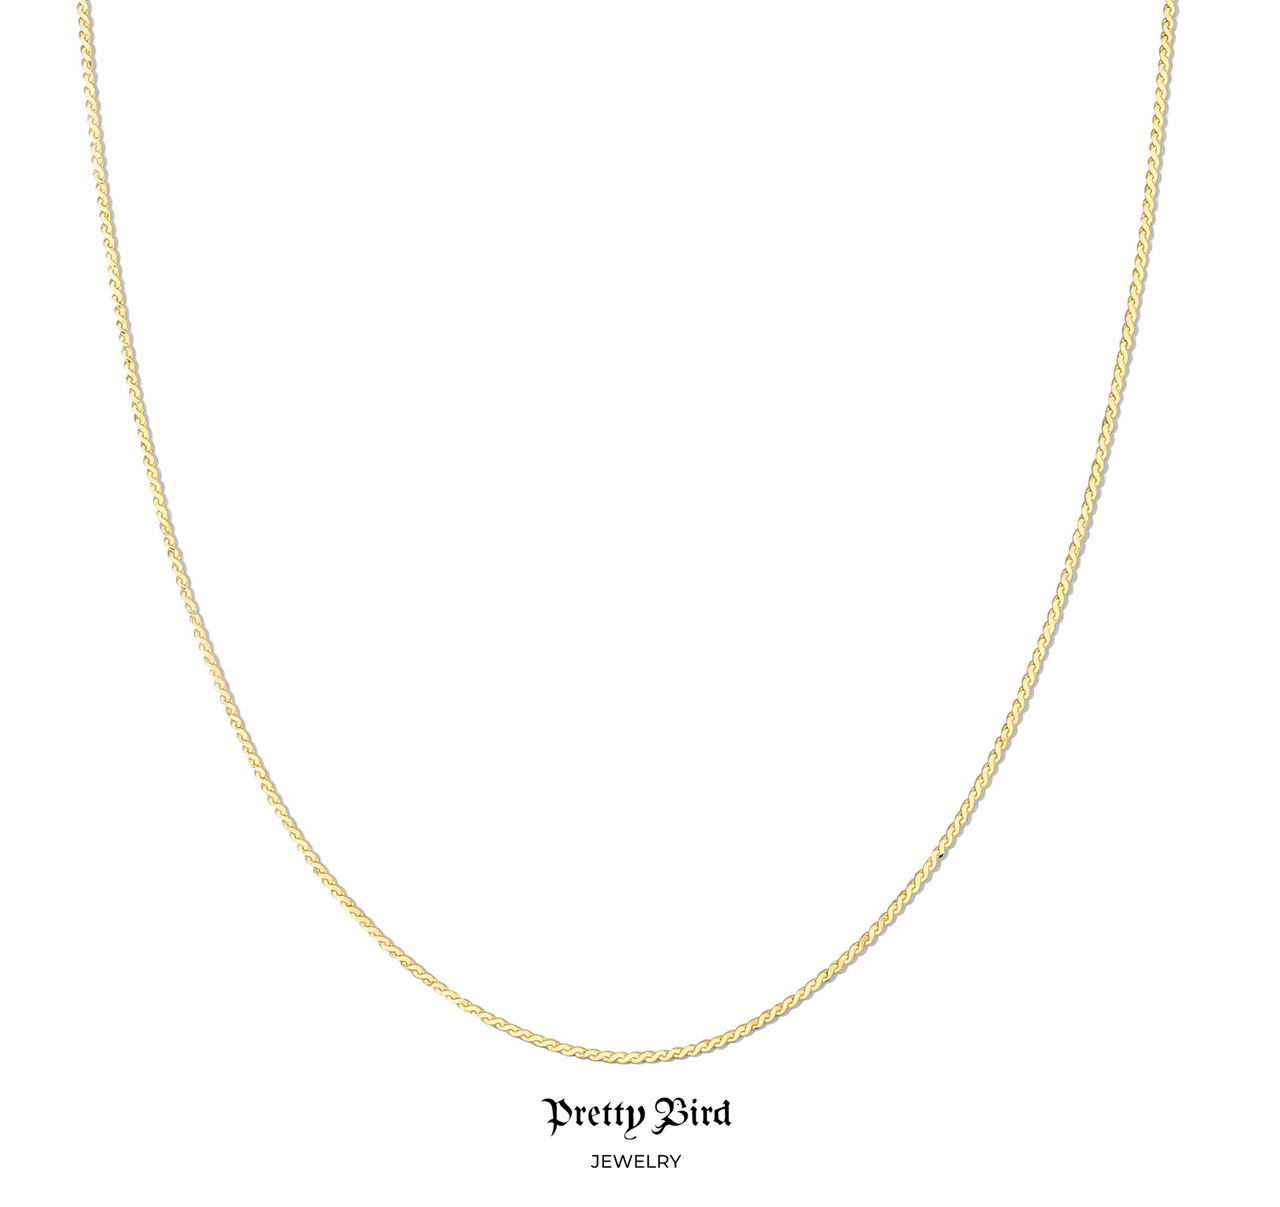 The Dainty Mini Wave Wire Necklace